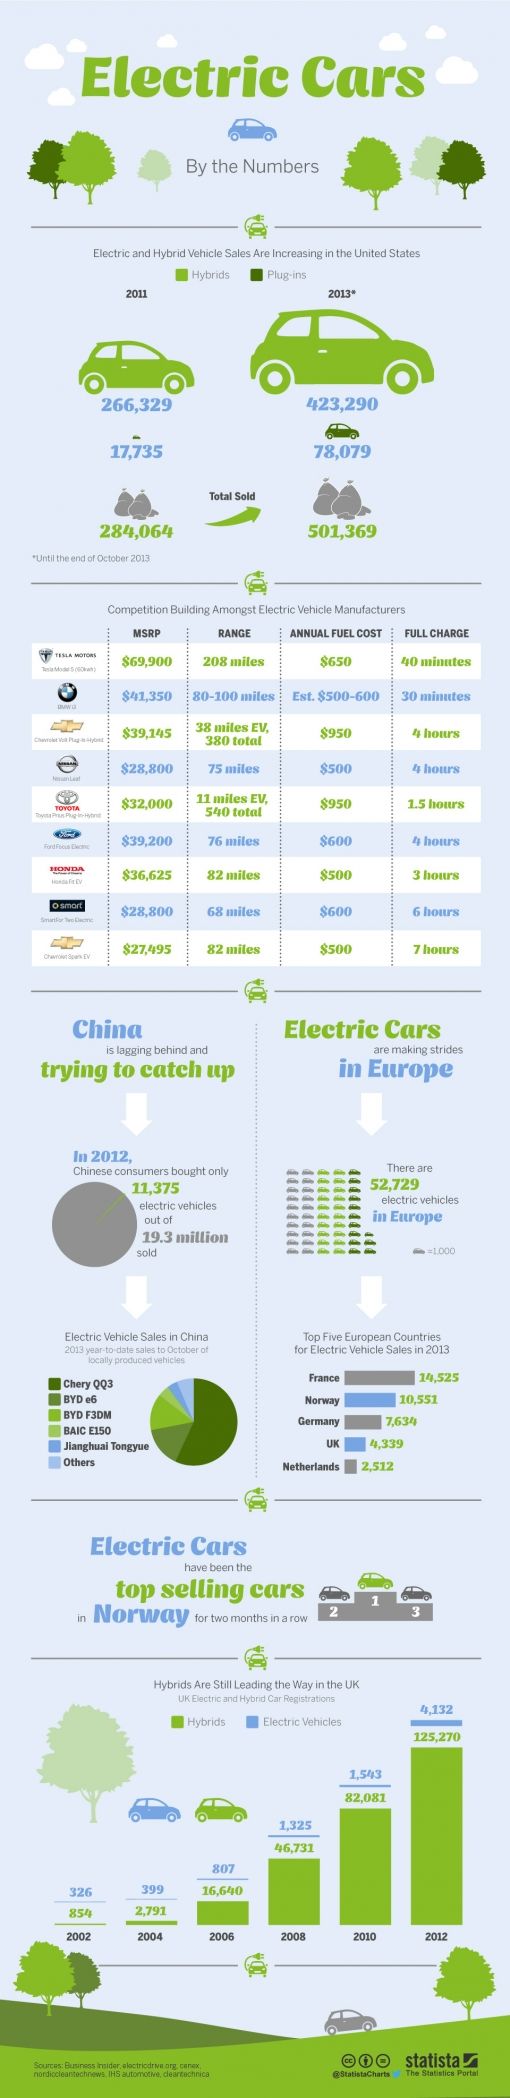 statista-infographic-1787-electric-and-h.jpg